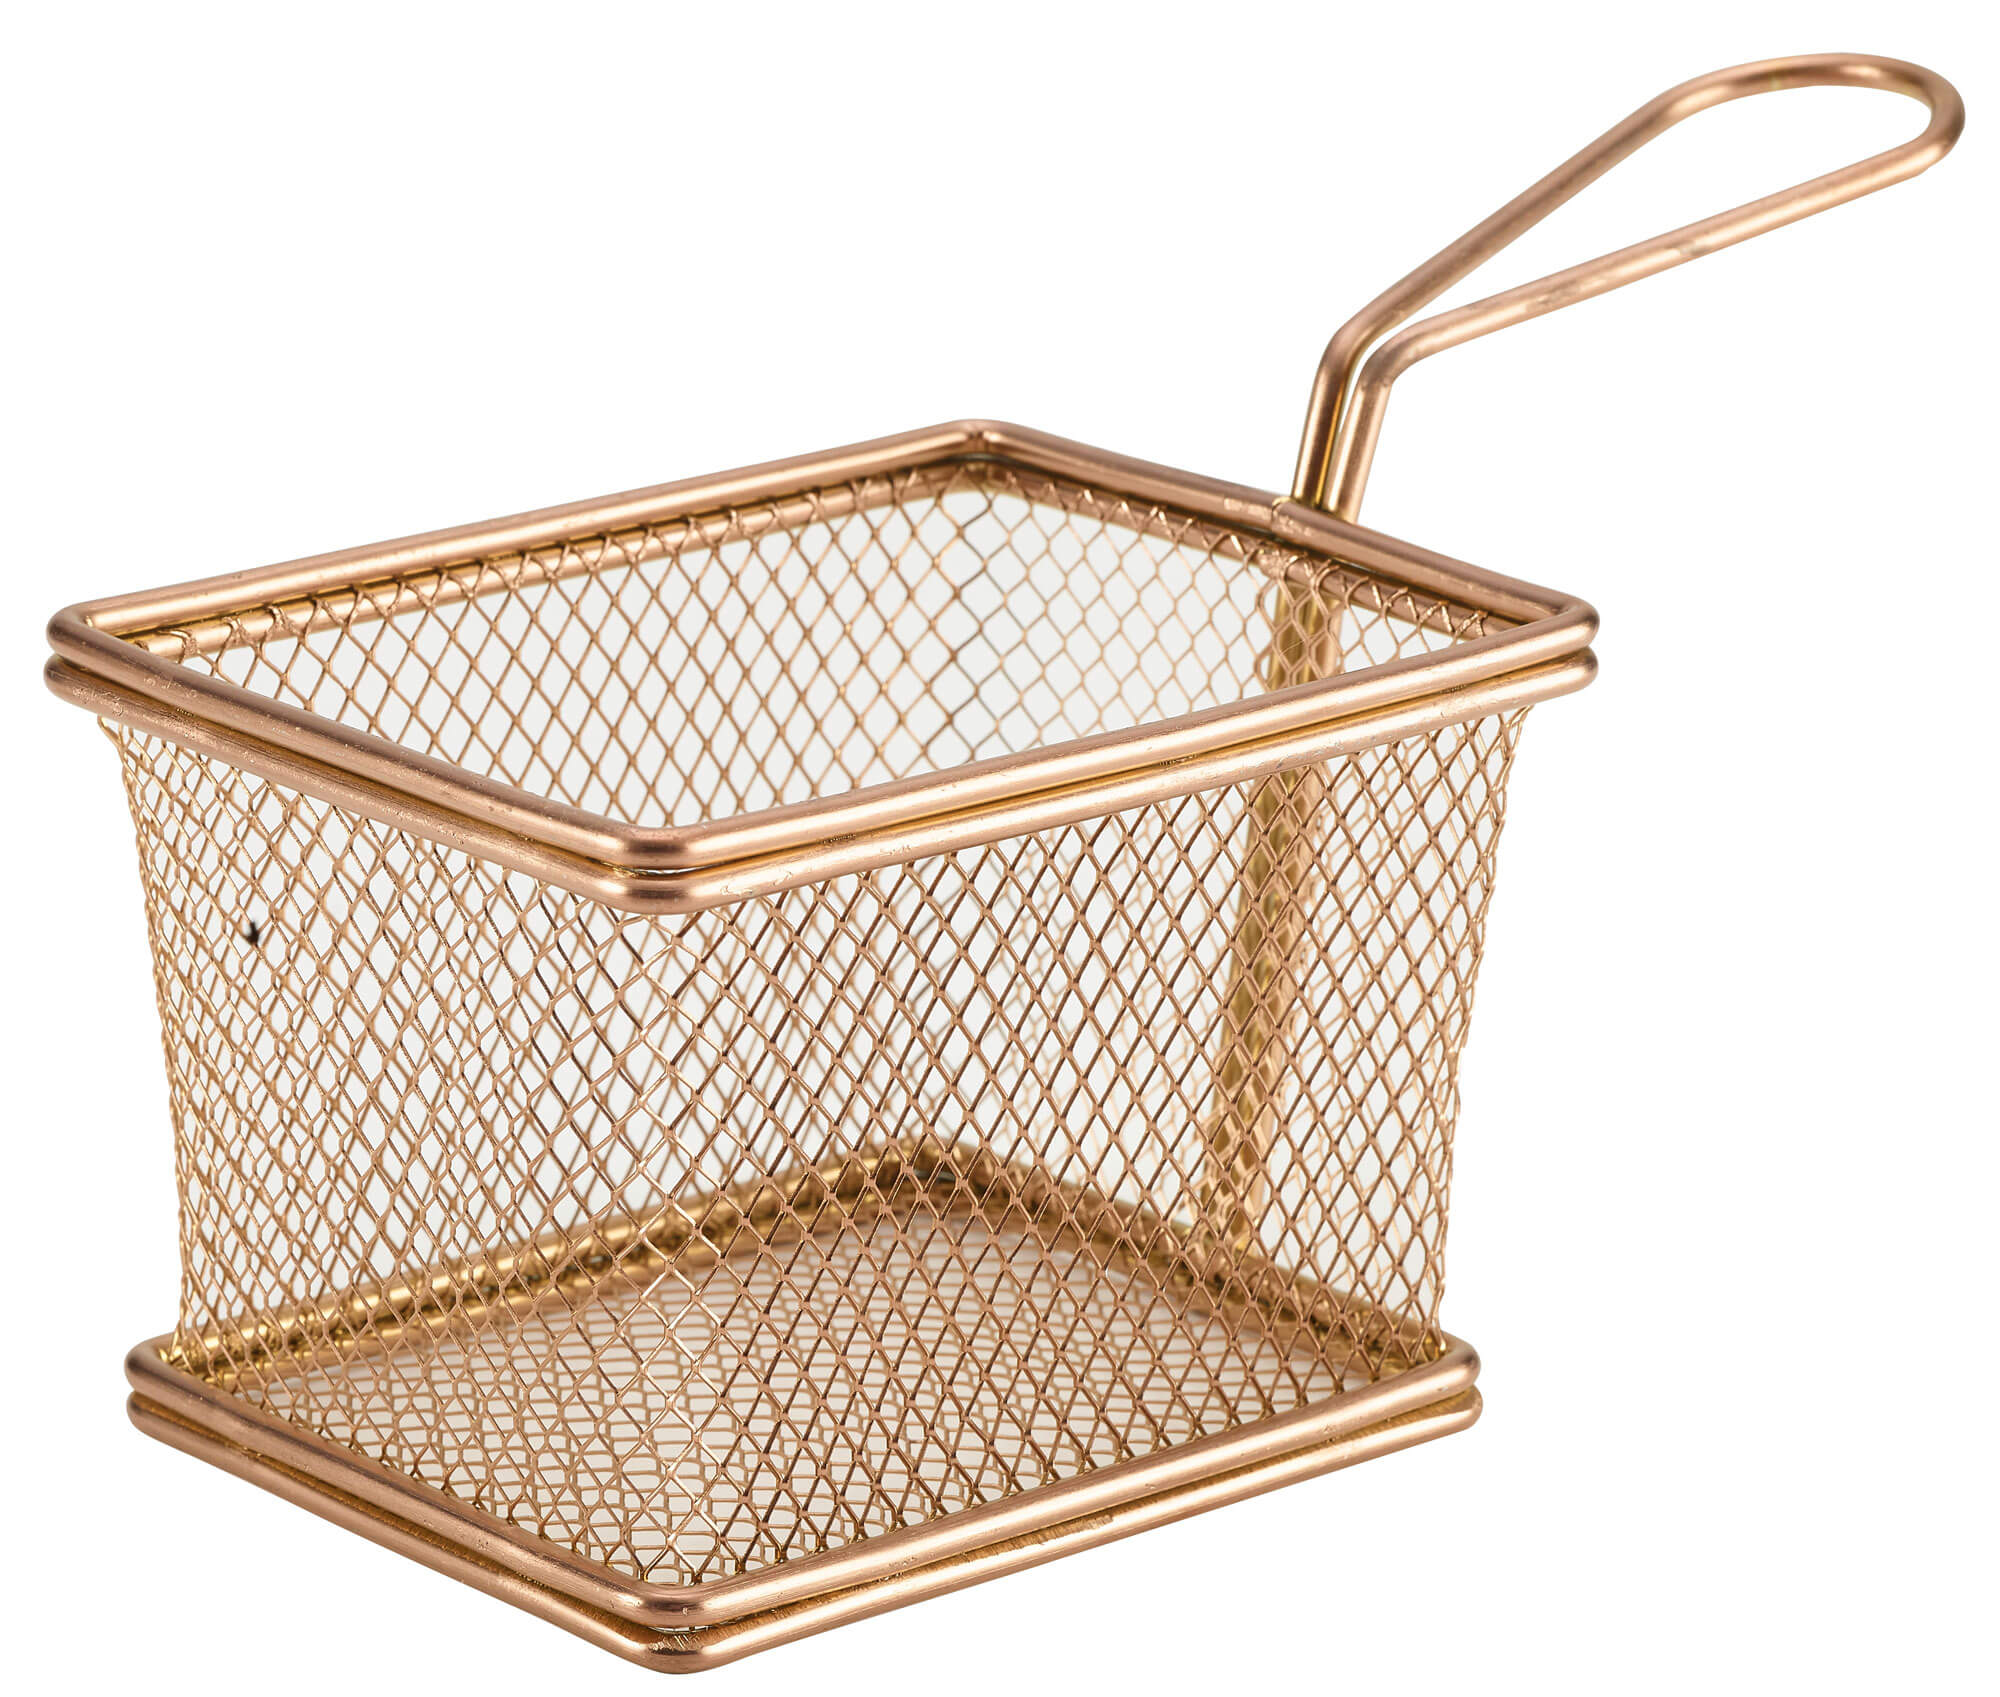 Fry basket stainless steel copper-colored - 12,5x10x8,5cm